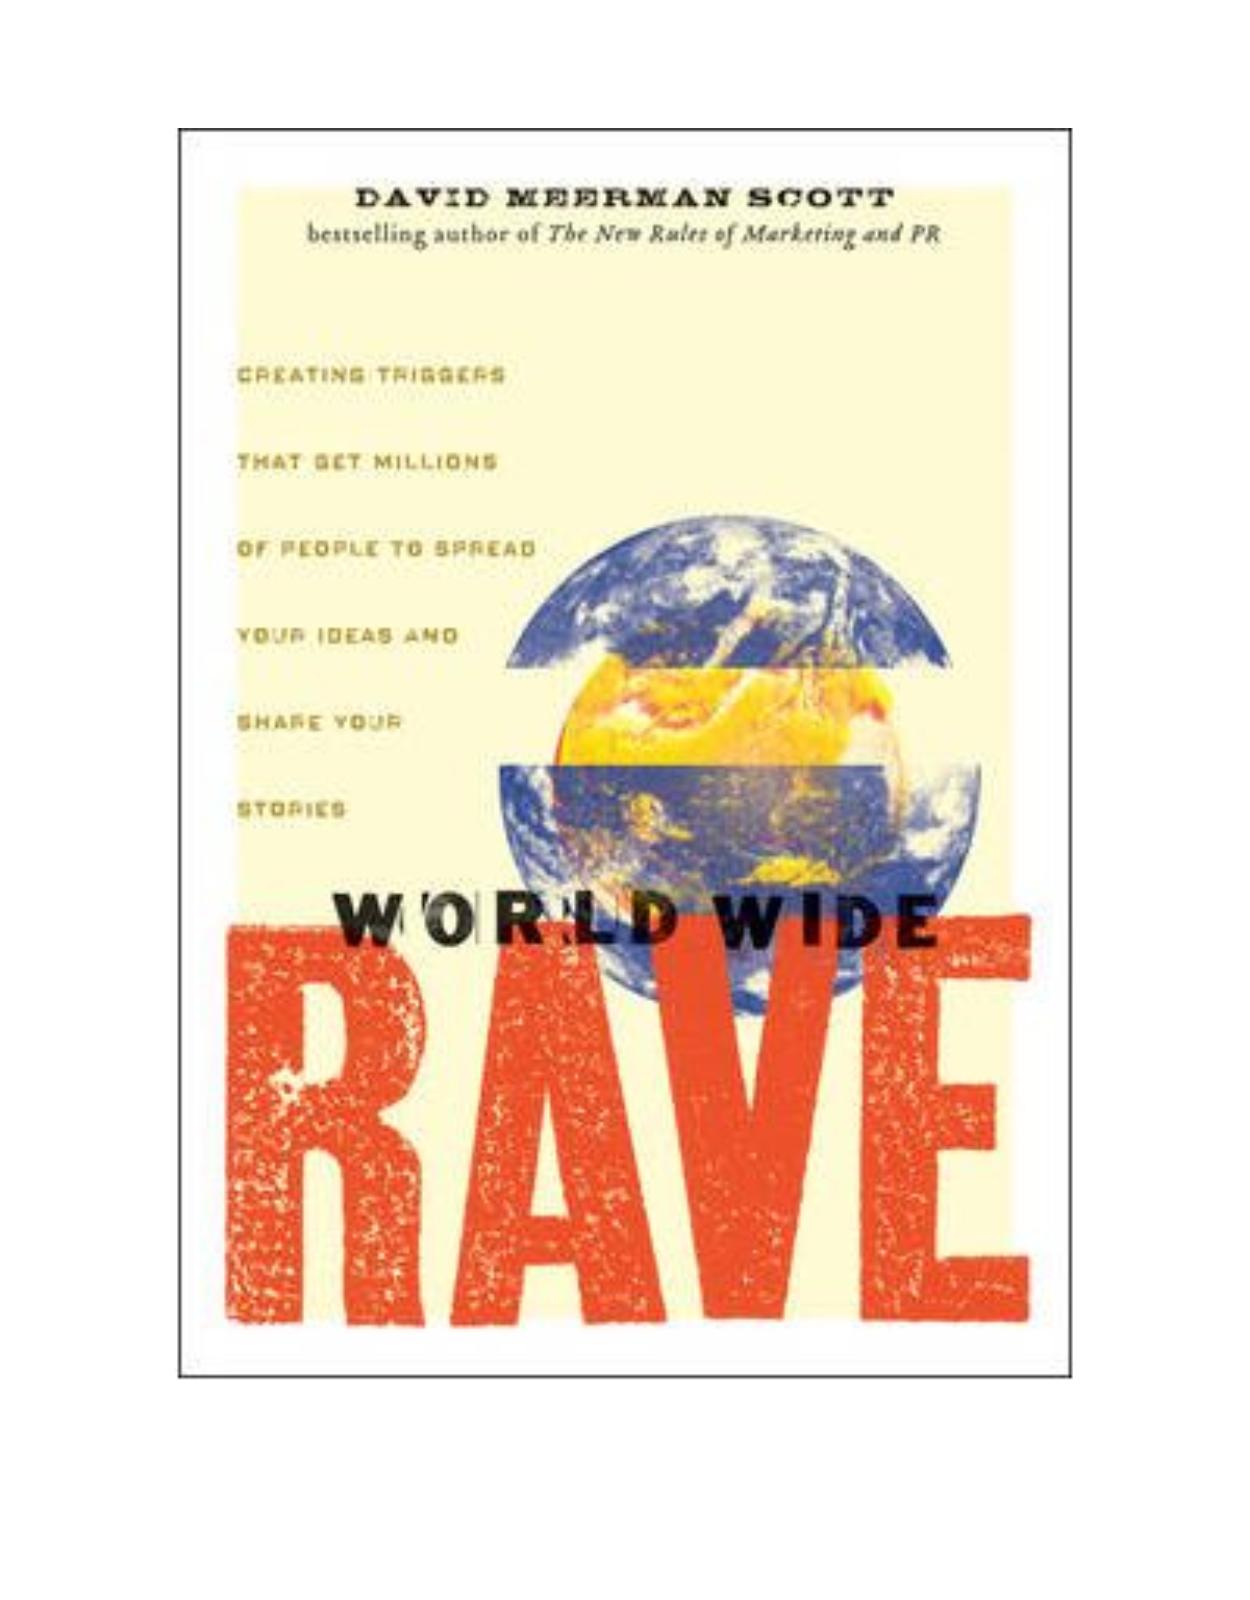 World Wide Rave: Creating Triggers that Get Millions of People to Spread Your Ideas and Share Your Stories